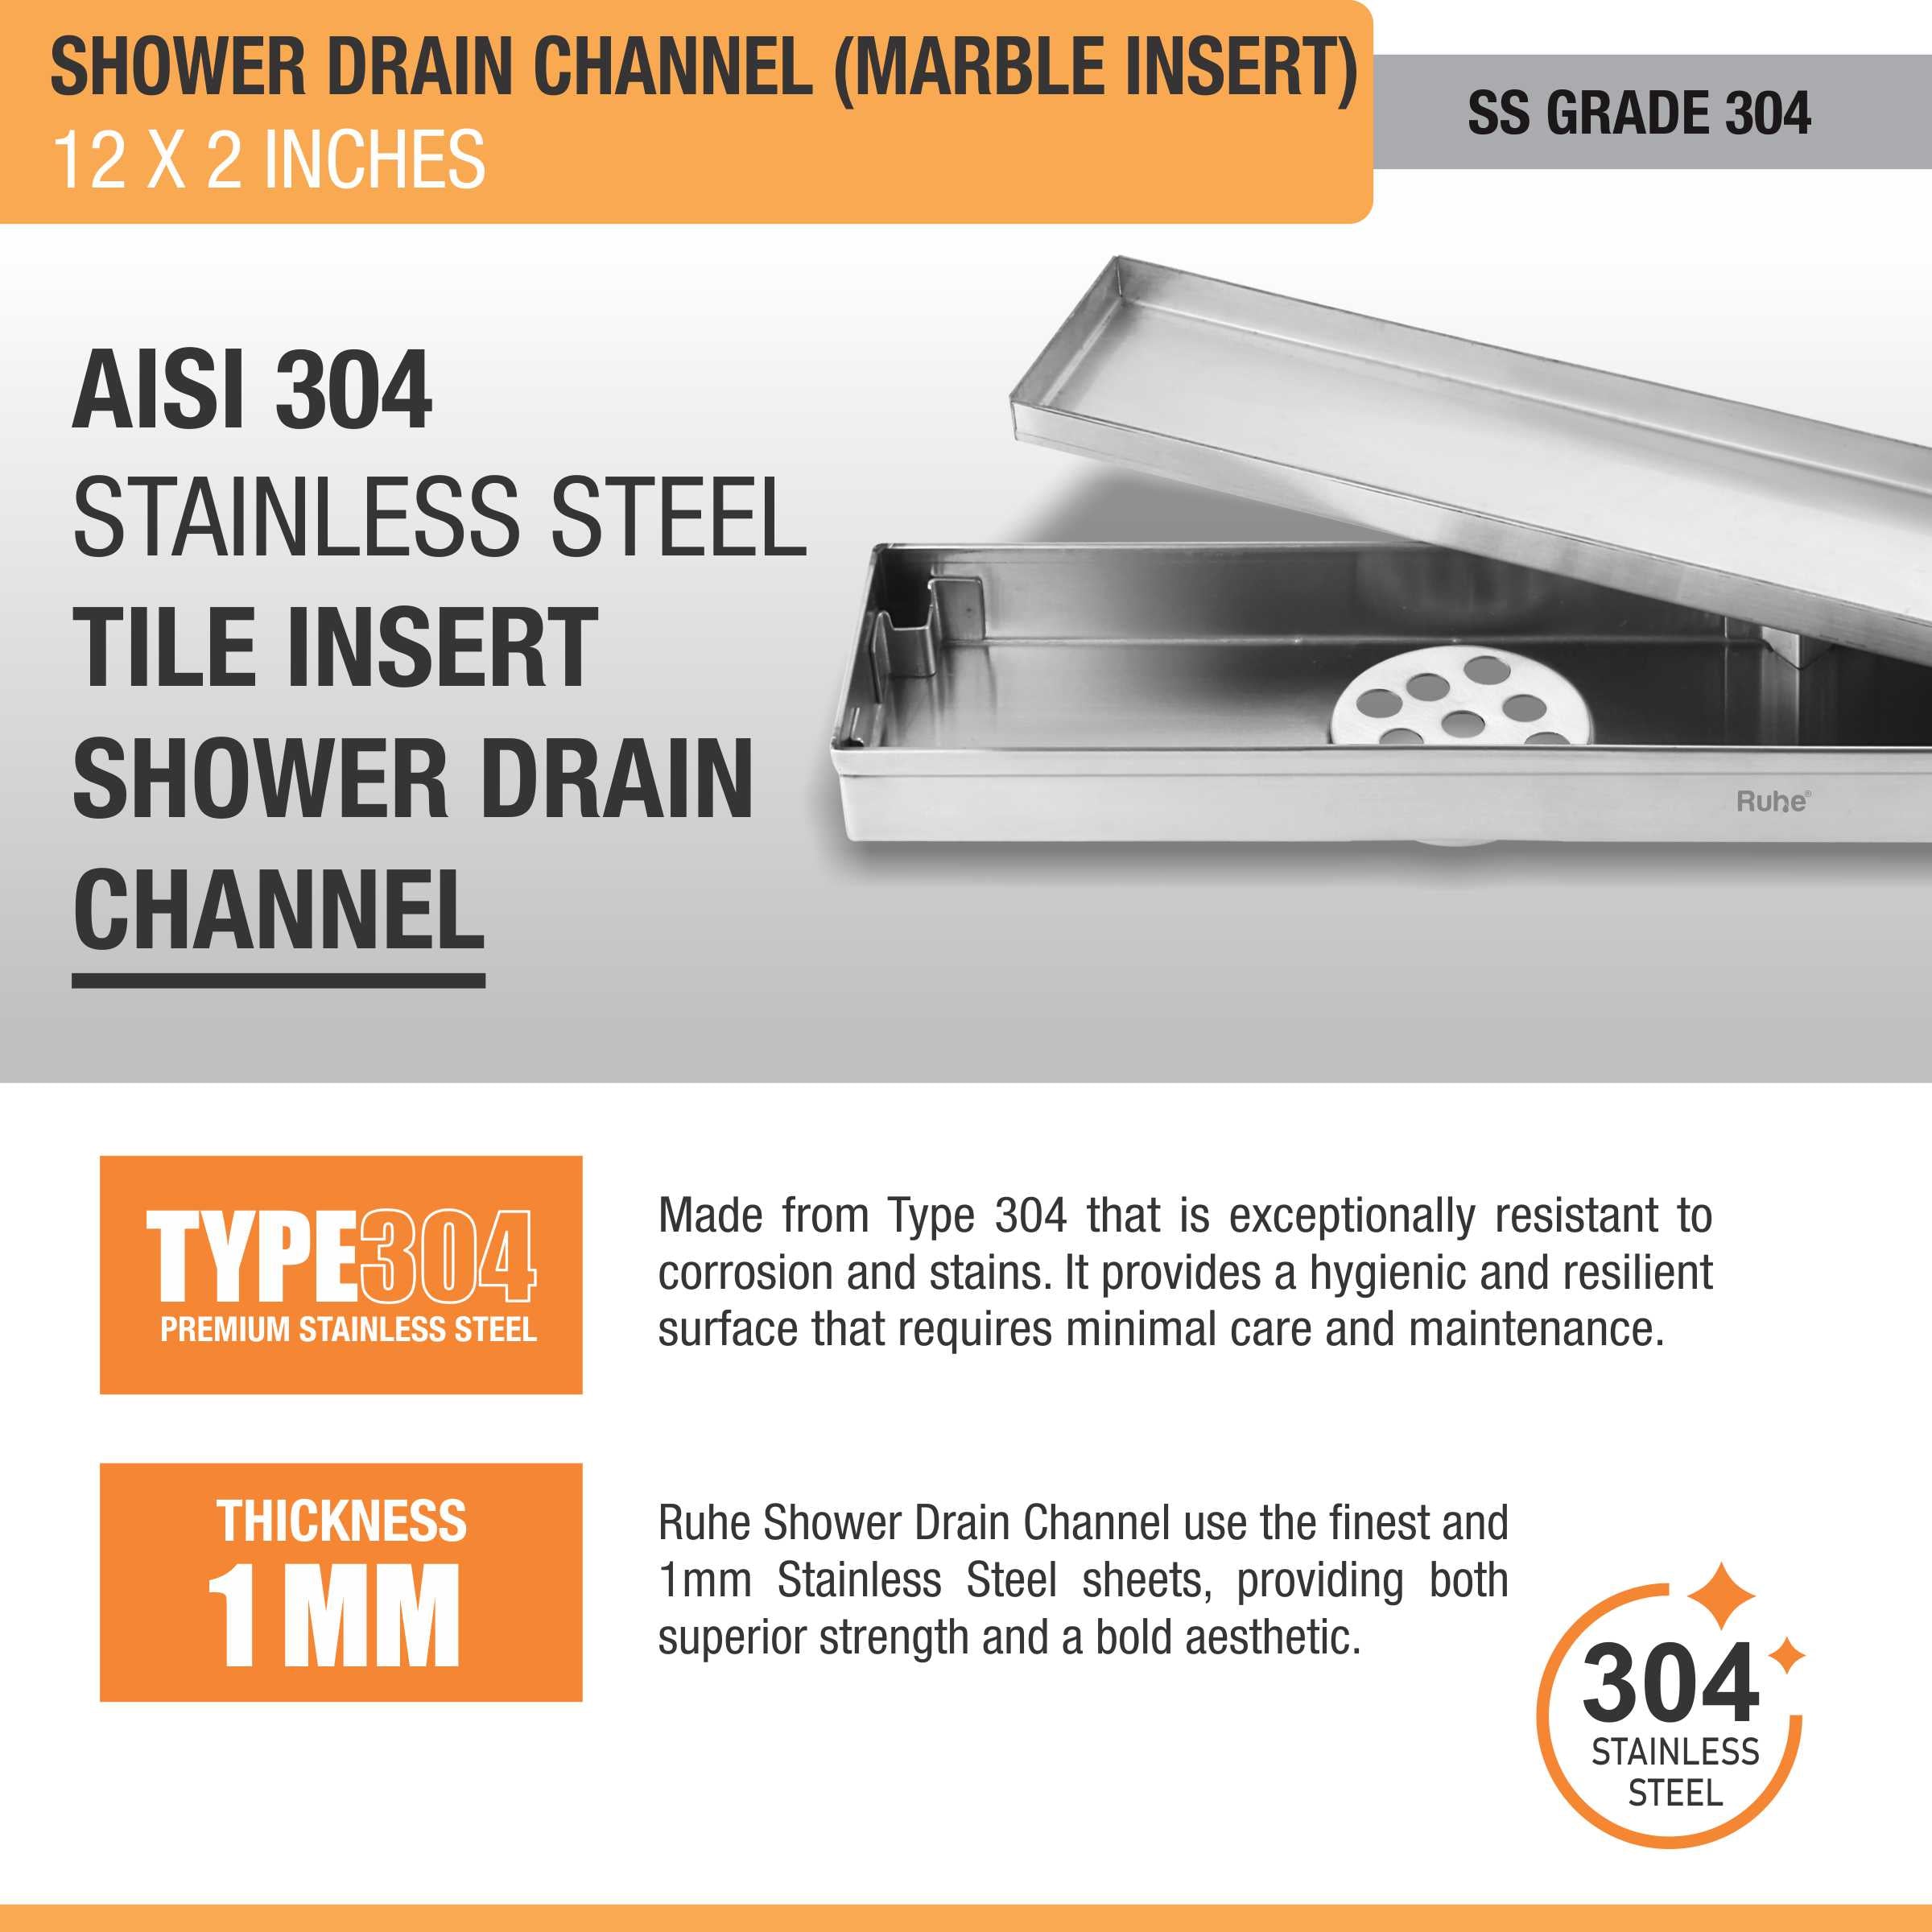 Marble Insert Shower Drain Channel (12 x 2 Inches) (304 Grade) stainless steel